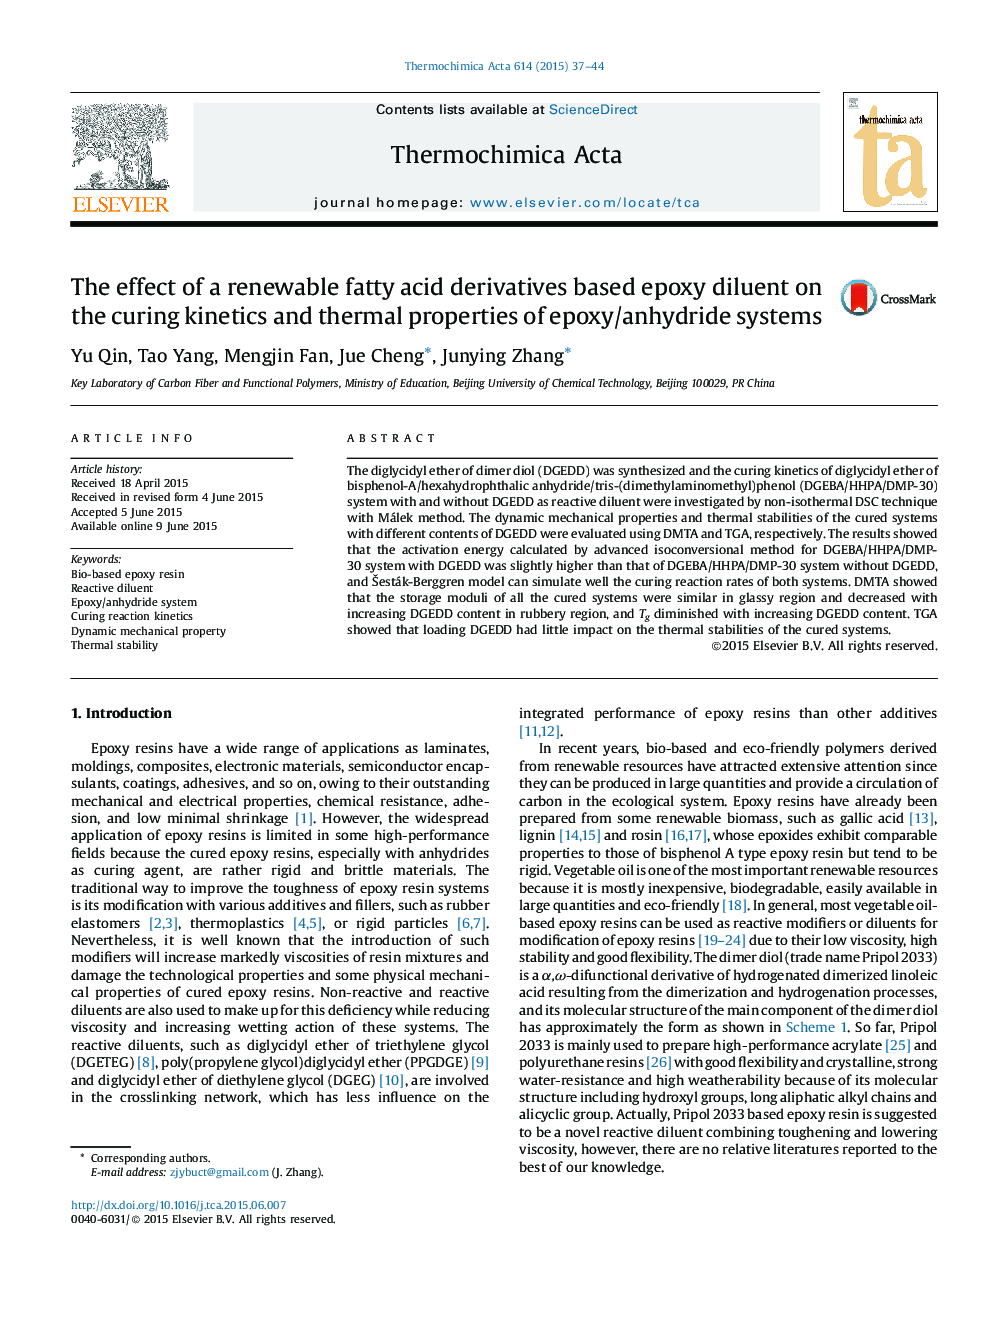 The effect of a renewable fatty acid derivatives based epoxy diluent on the curing kinetics and thermal properties of epoxy/anhydride systems